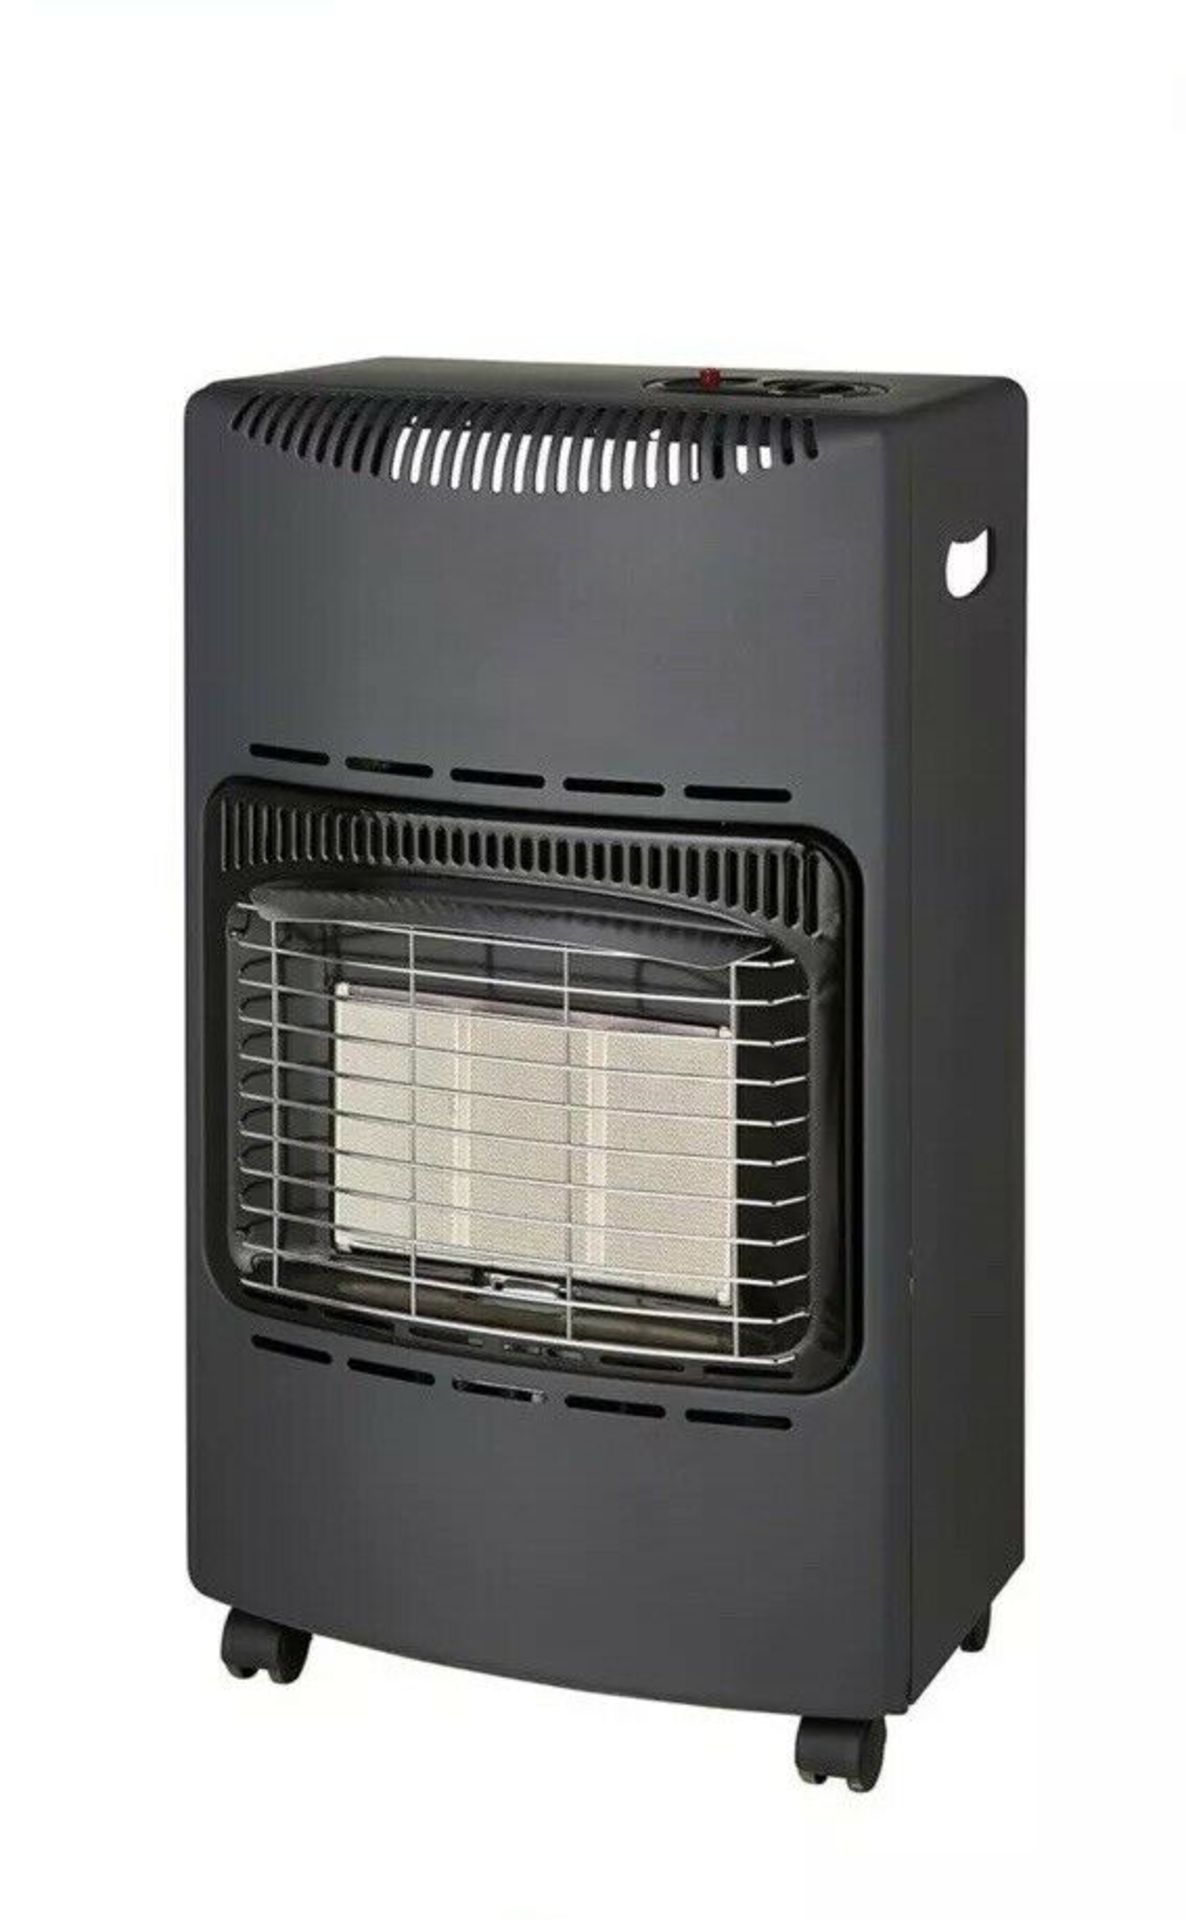 (UR38) Greengear Gas Black Gas Heater. RRP £135.00. Warm your home in style with this slim cab...